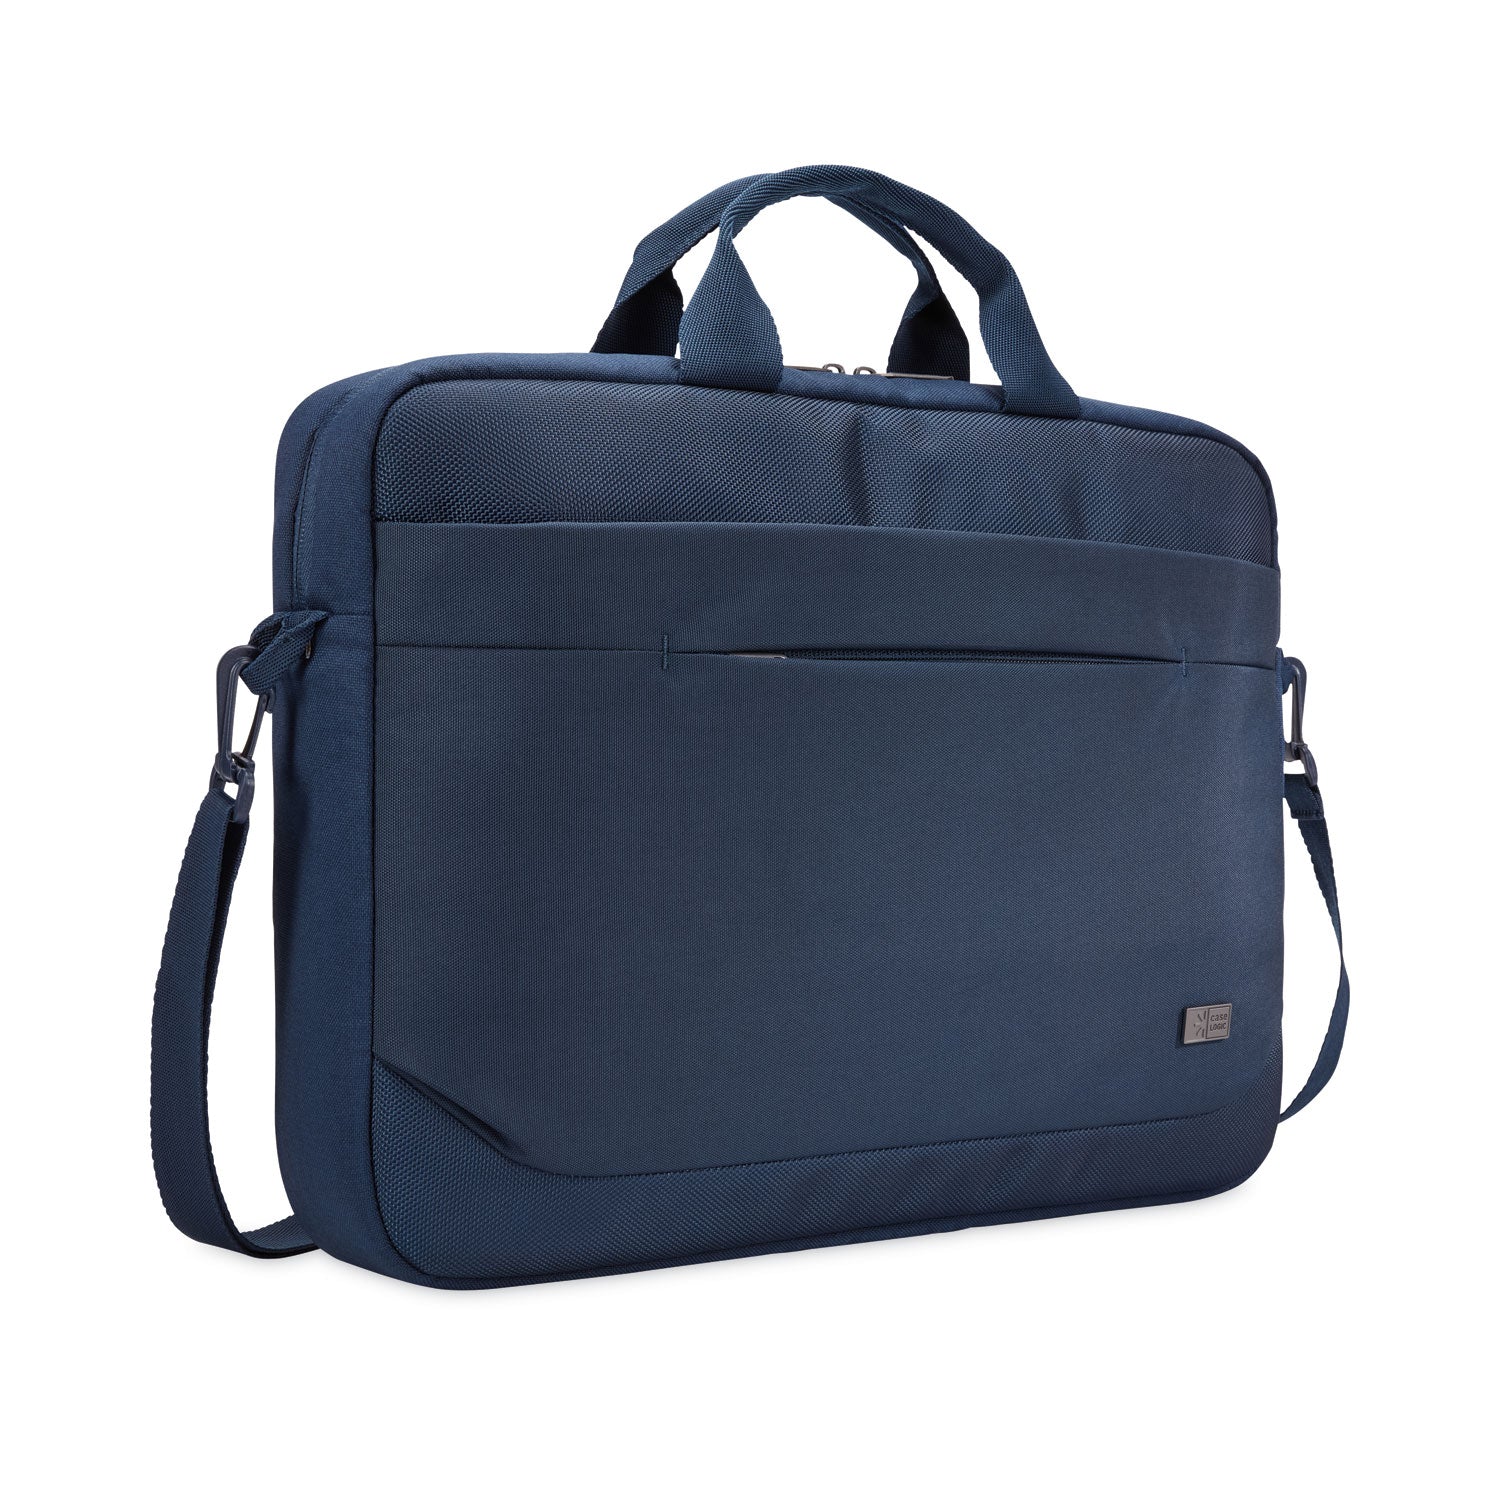 advantage-laptop-attache-fits-devices-up-to-14-polyester-146-x-28-x-13-dark-blue_clg3203987 - 2